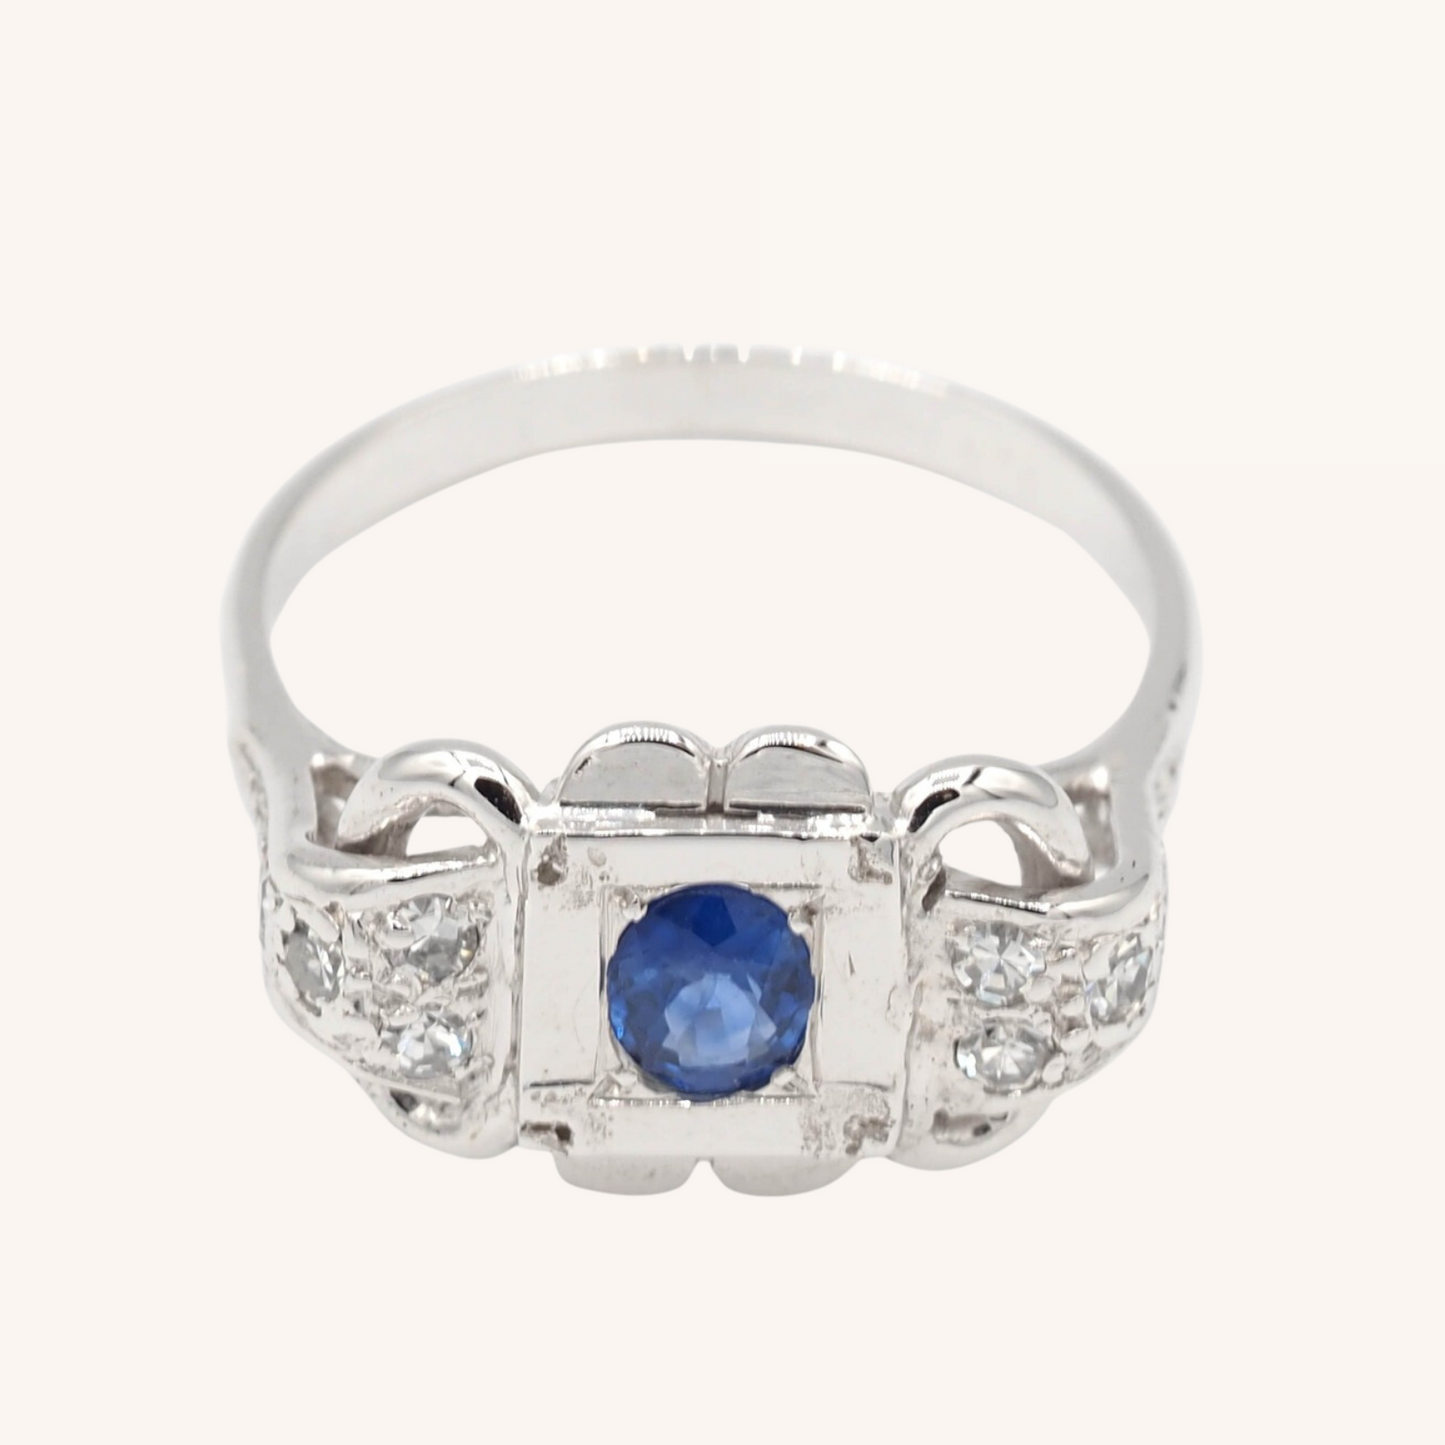 Sapphire oval ring